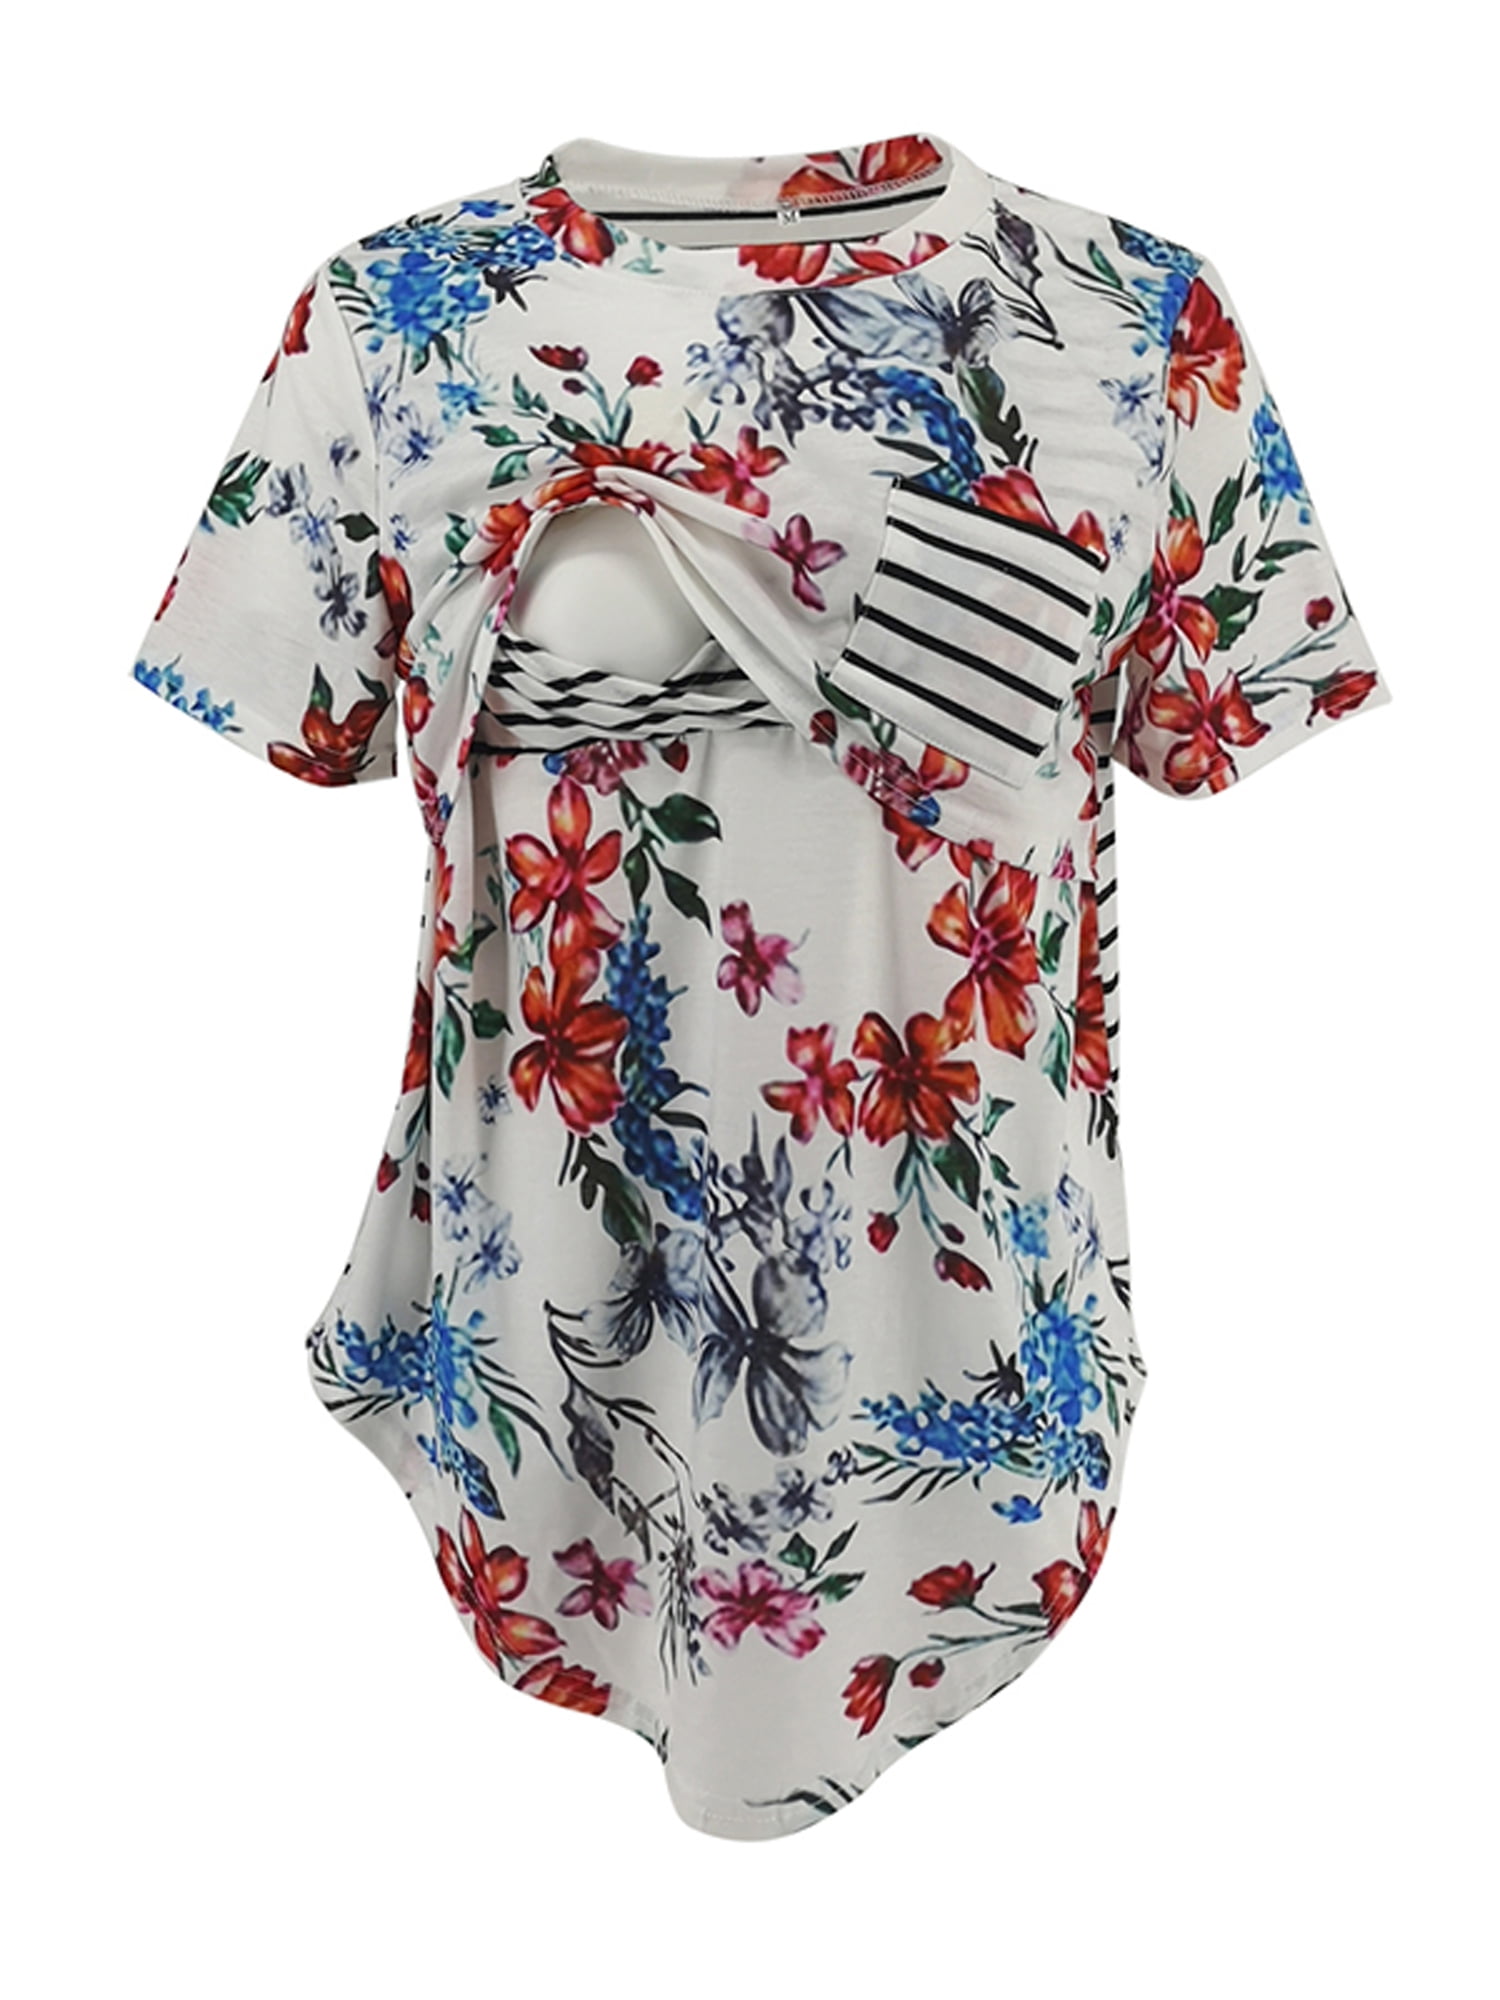 US 8-10 Floral, M Womens V Neck Short Sleeve Comfy Layered Nursing Top and Shirts for Breastfeeding